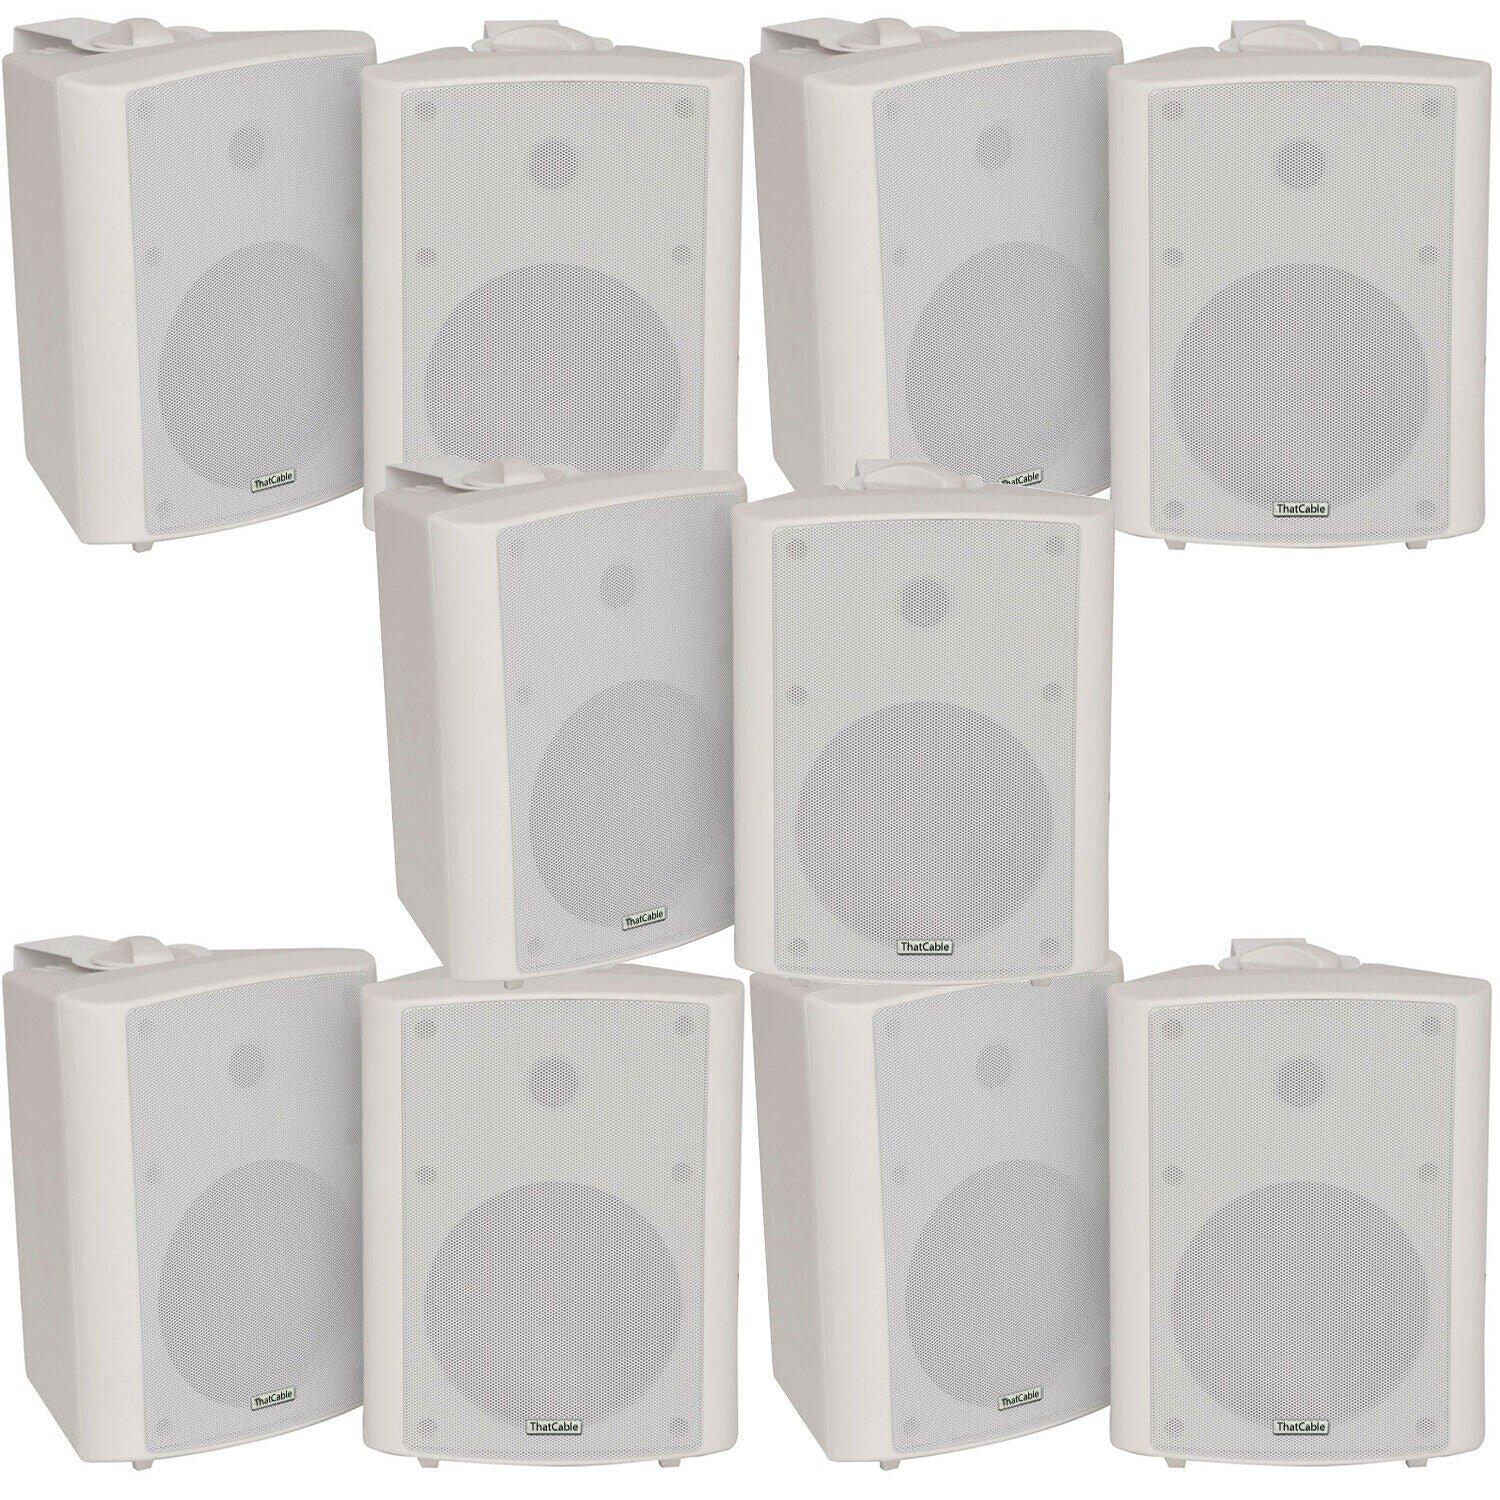 10x 90W White Wall Mounted Stereo Speakers 5.25